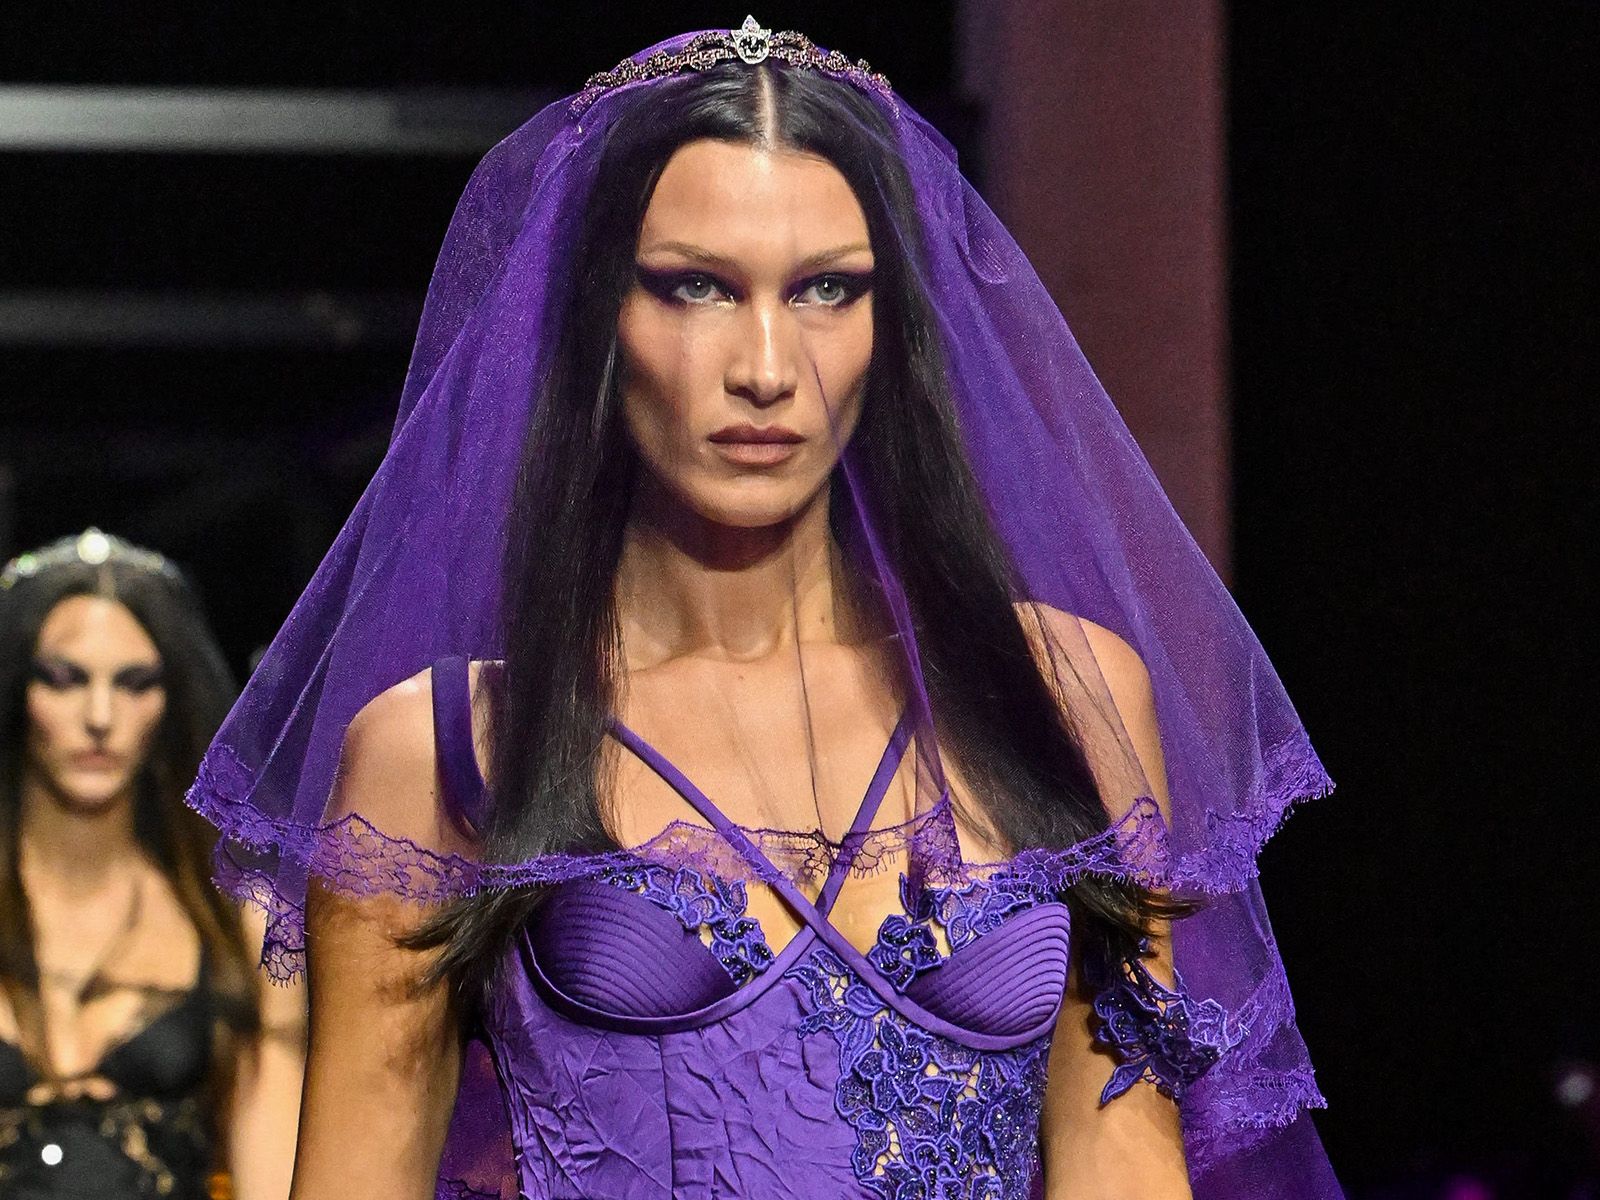 Versace brings out its gothic side in its latest show